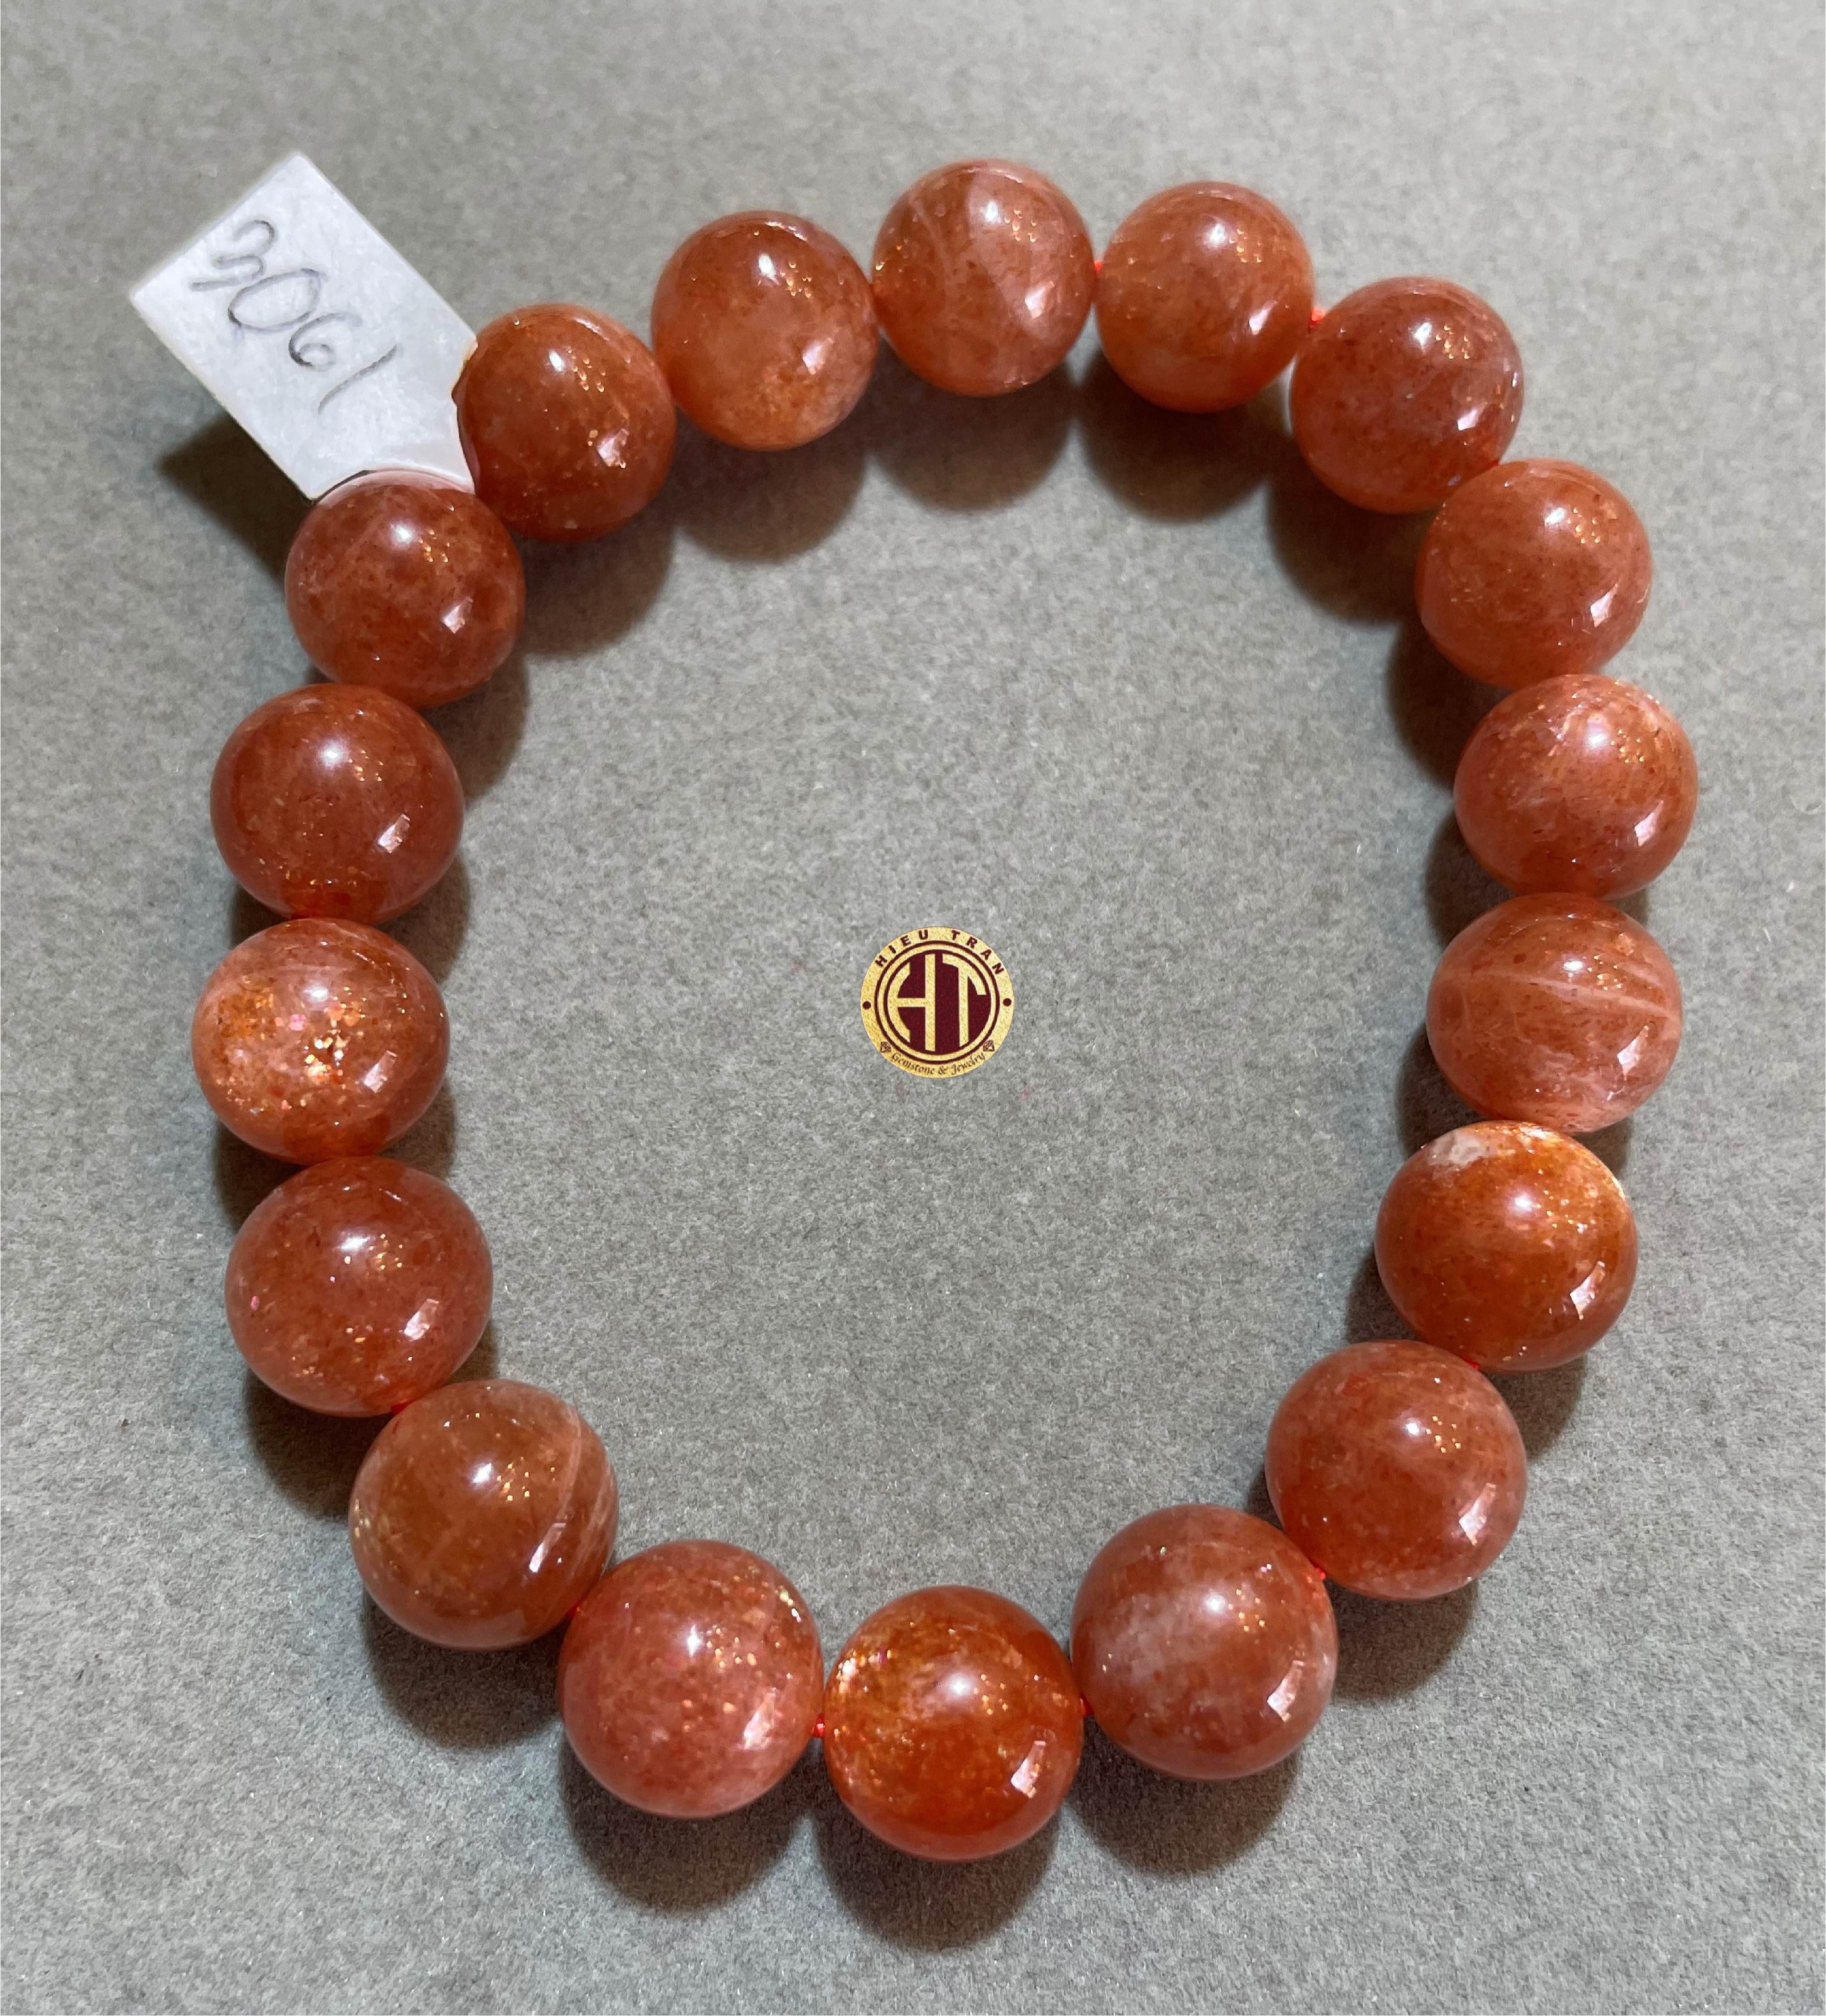 Buy 6mm Golden Sunstone Bracelet, AAA Grade, Gold Plated Sun Pendant,  Healing Crystals,wrist Mala Beads,sacral Chakra,sexuality Personal Power  Online in India - Etsy